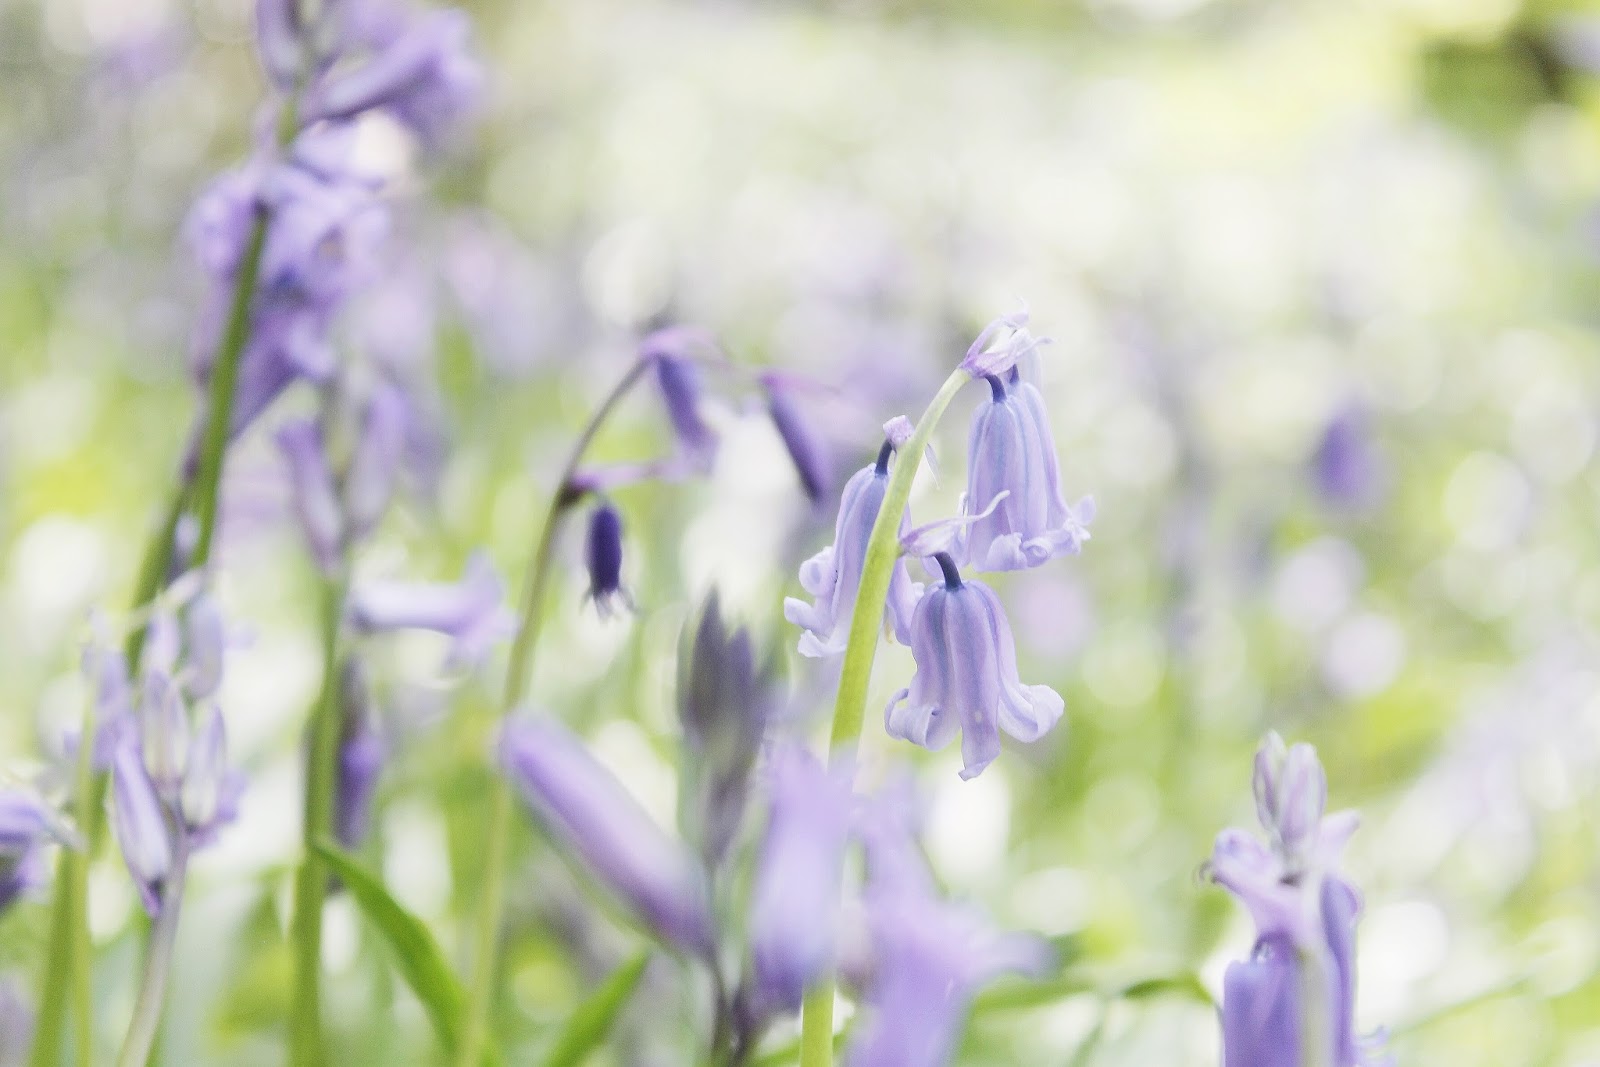 Where to find bluebells, the best places for bluebells in the UK